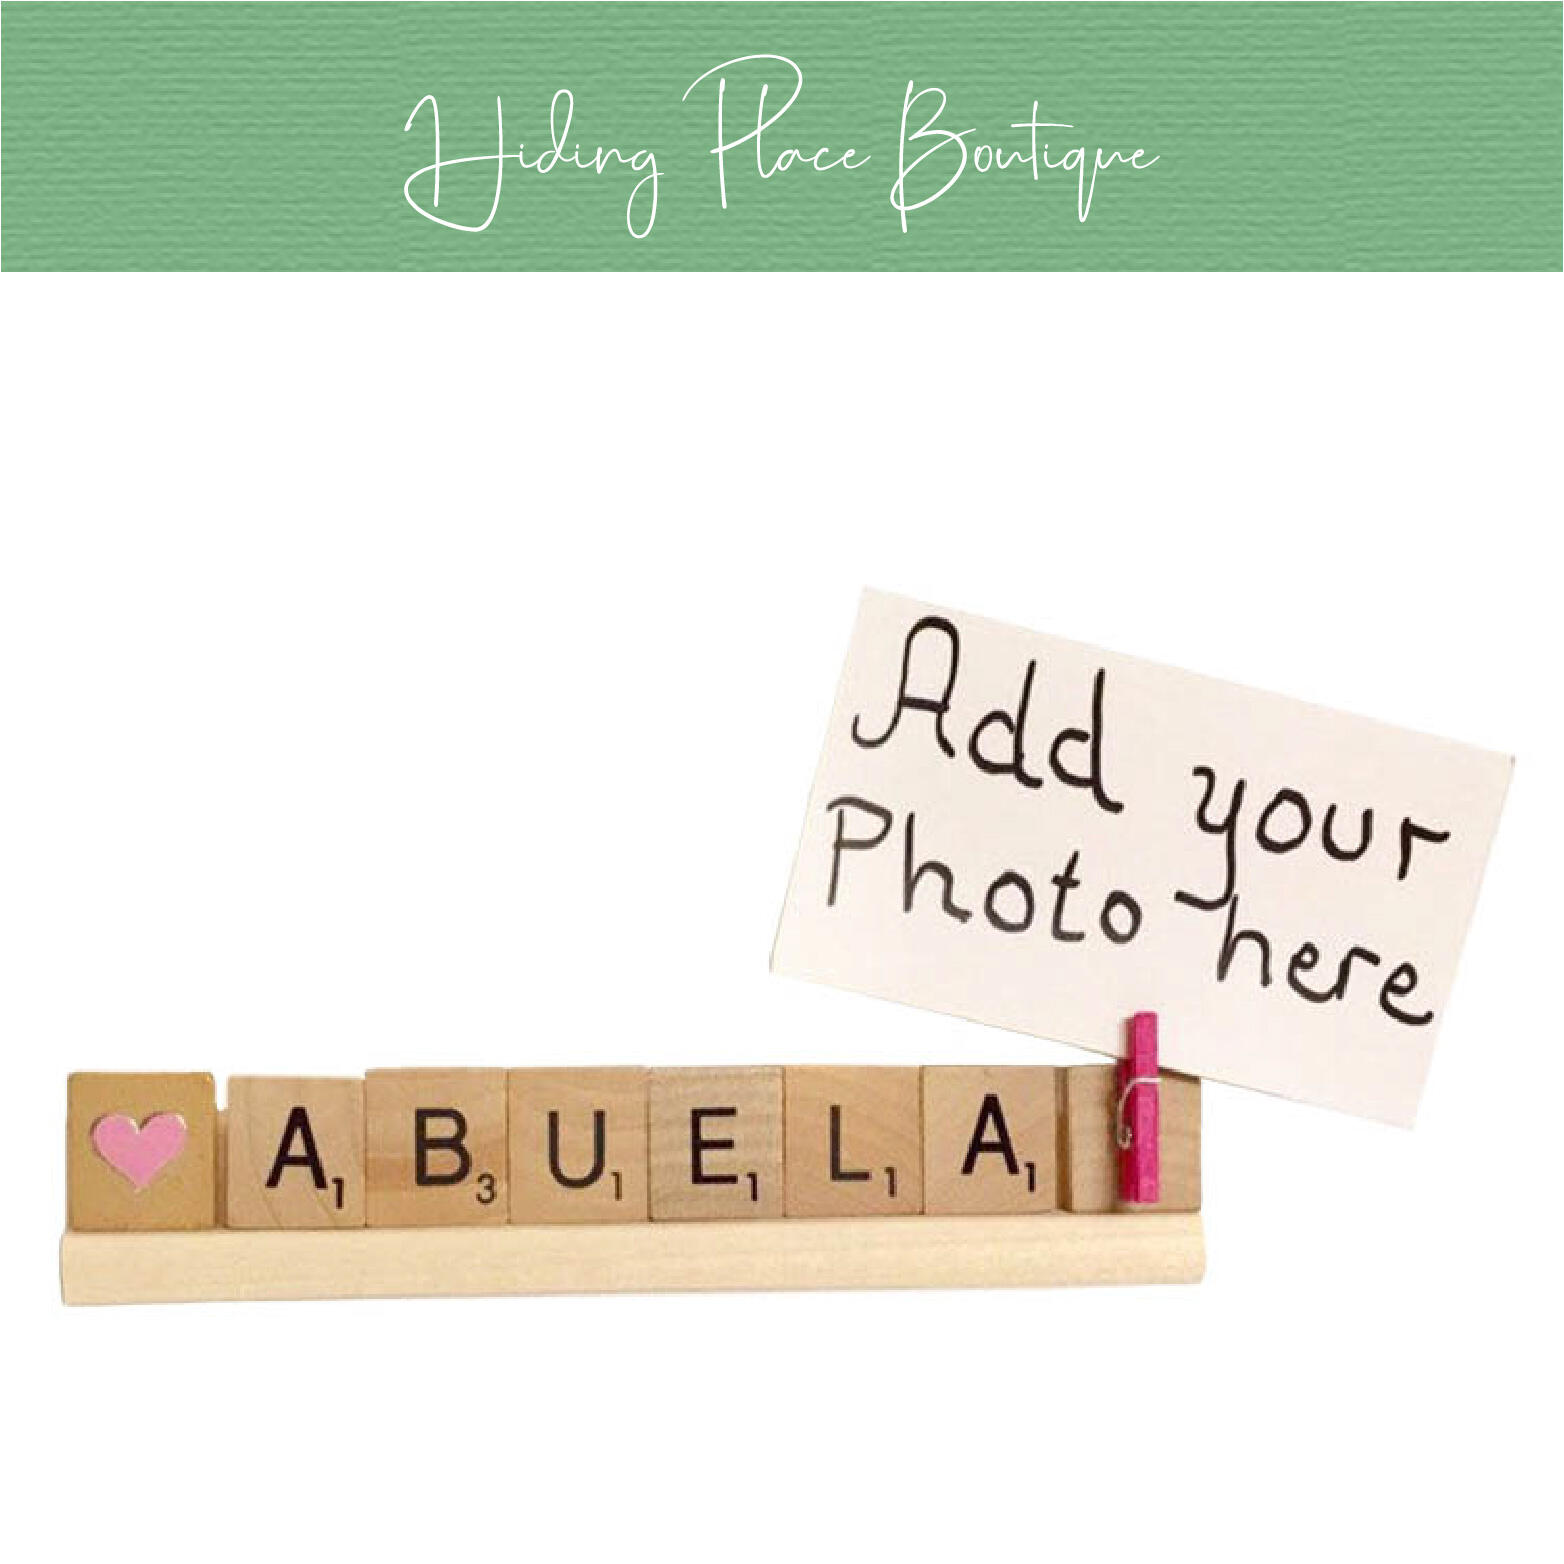 abuela photo frame by hiding place boutique